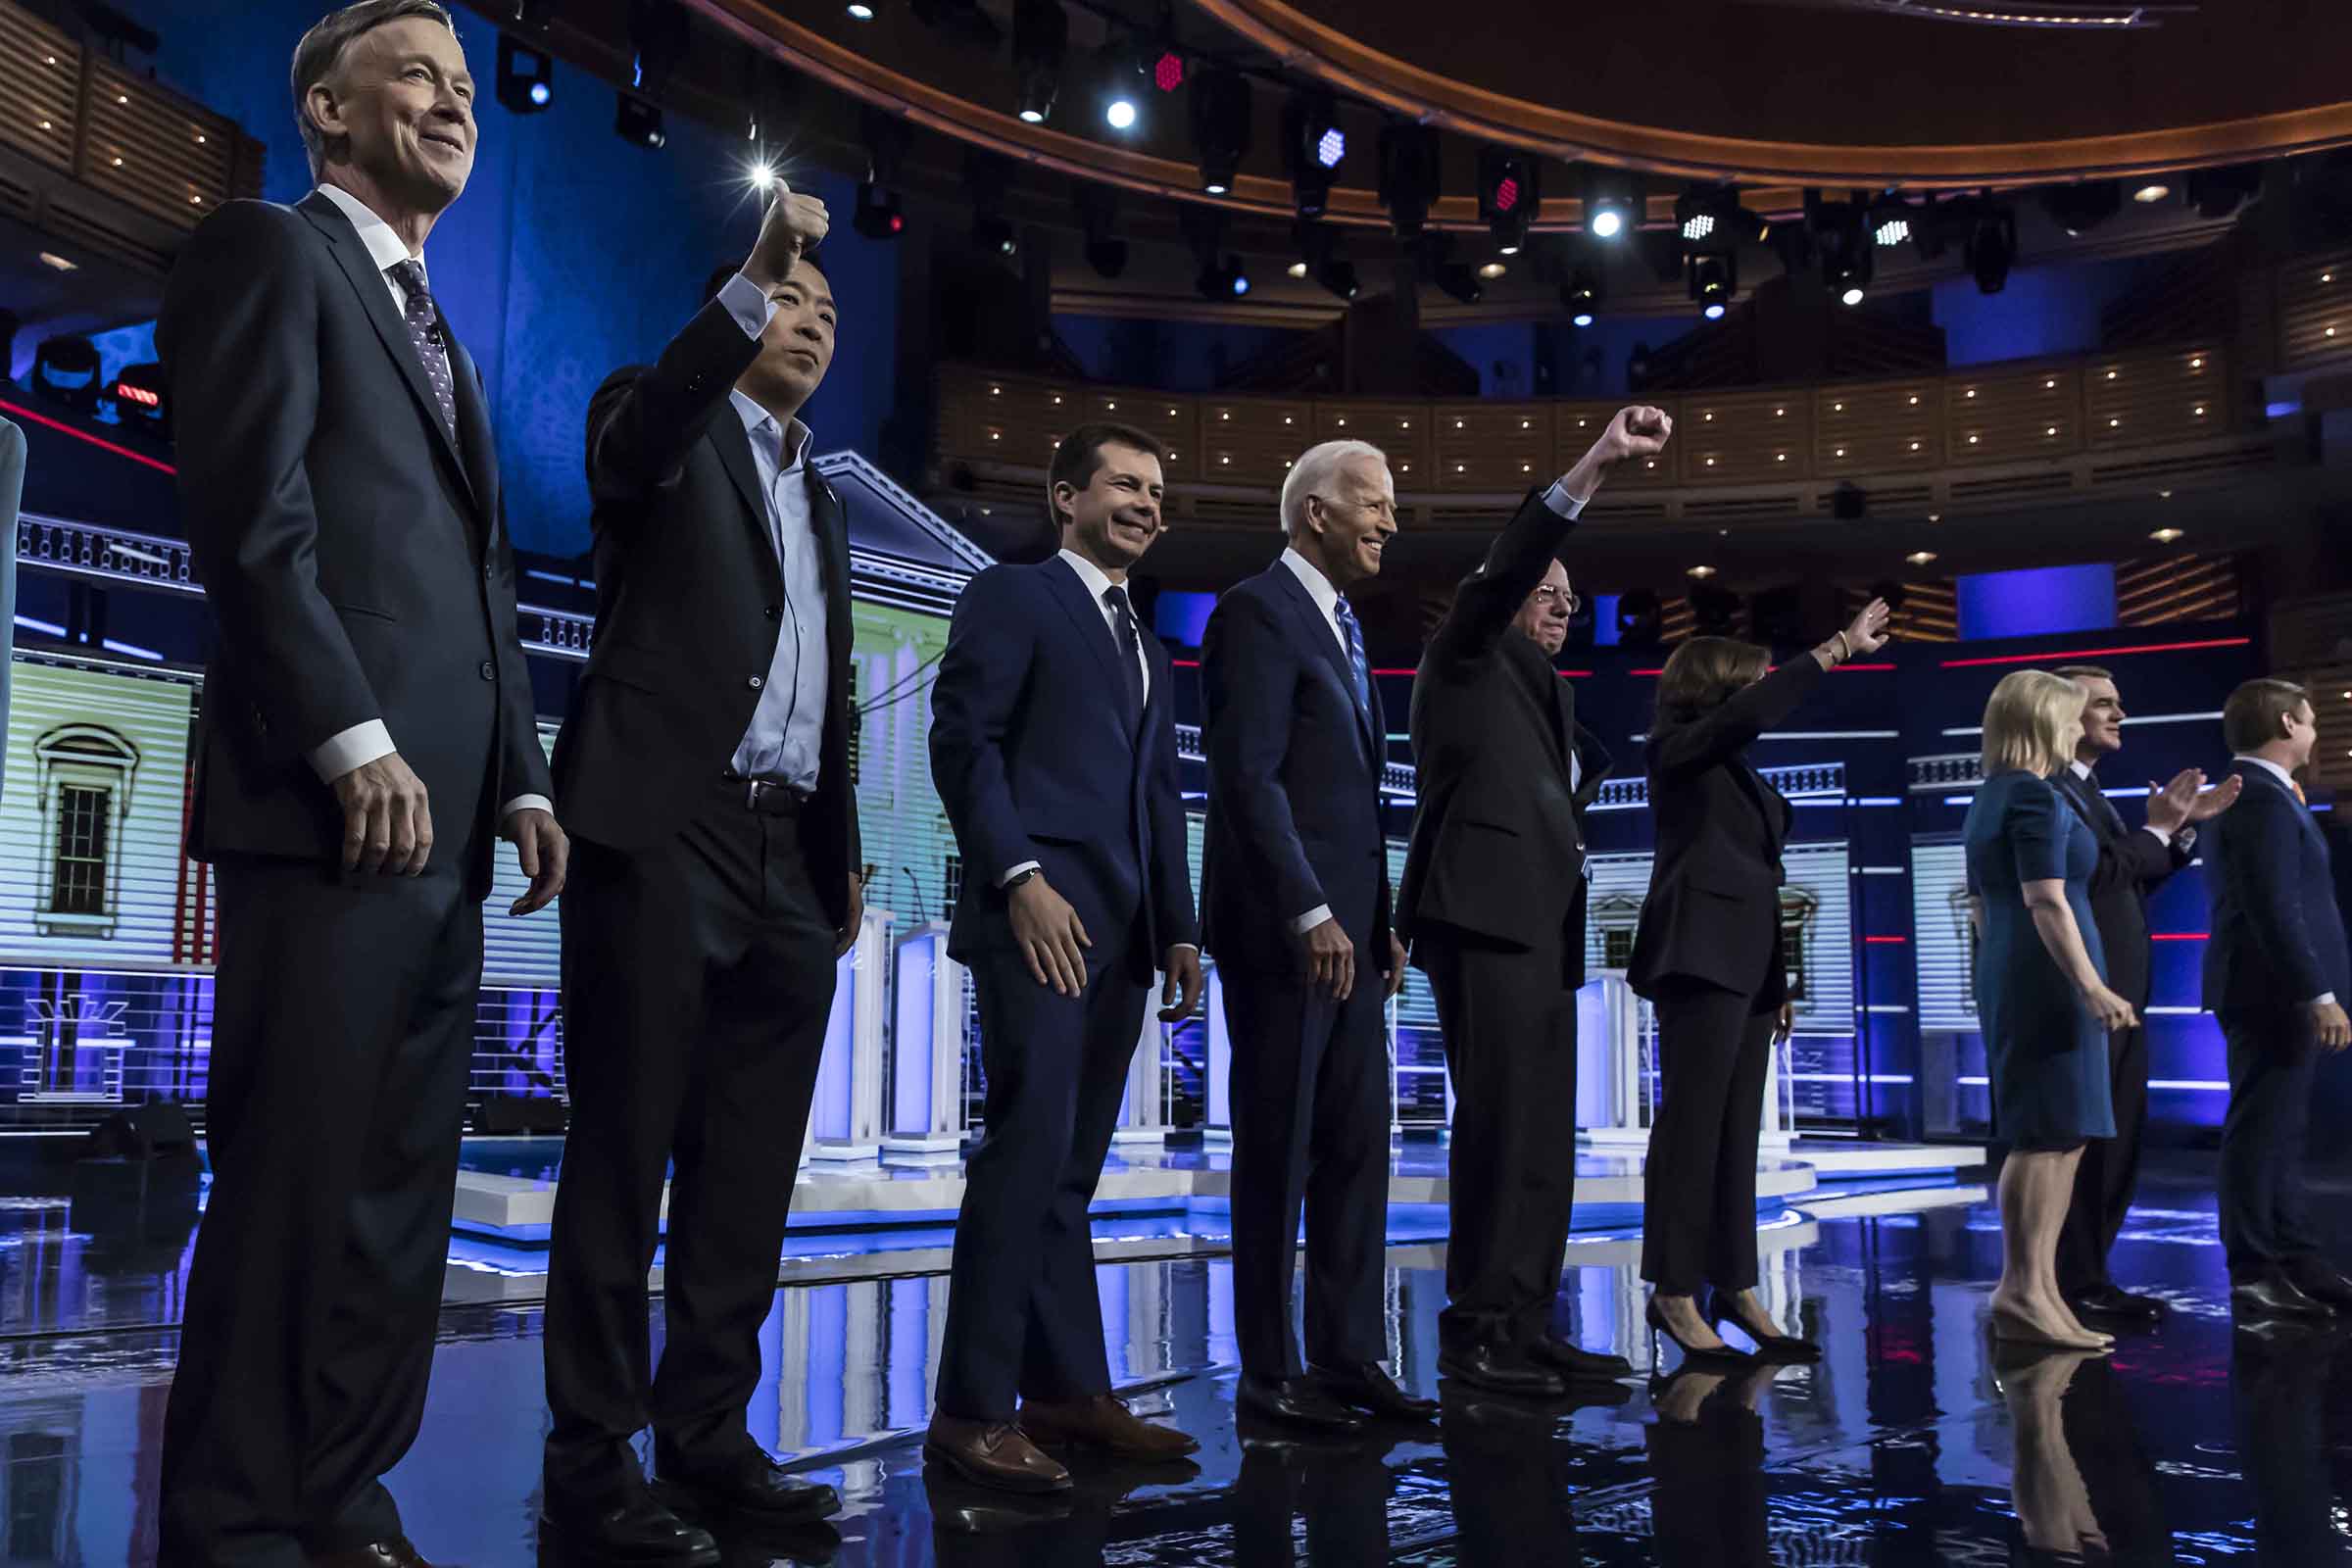 Democratic presidential hopefuls take the stage in the second Democratic primary debate of the 2020 presidential campaign season hosted by NBC News at the Adrienne Arsht Center for the Performing Arts in Miami, Florida, June 27, 2019. (Christopher Morris for TIME)